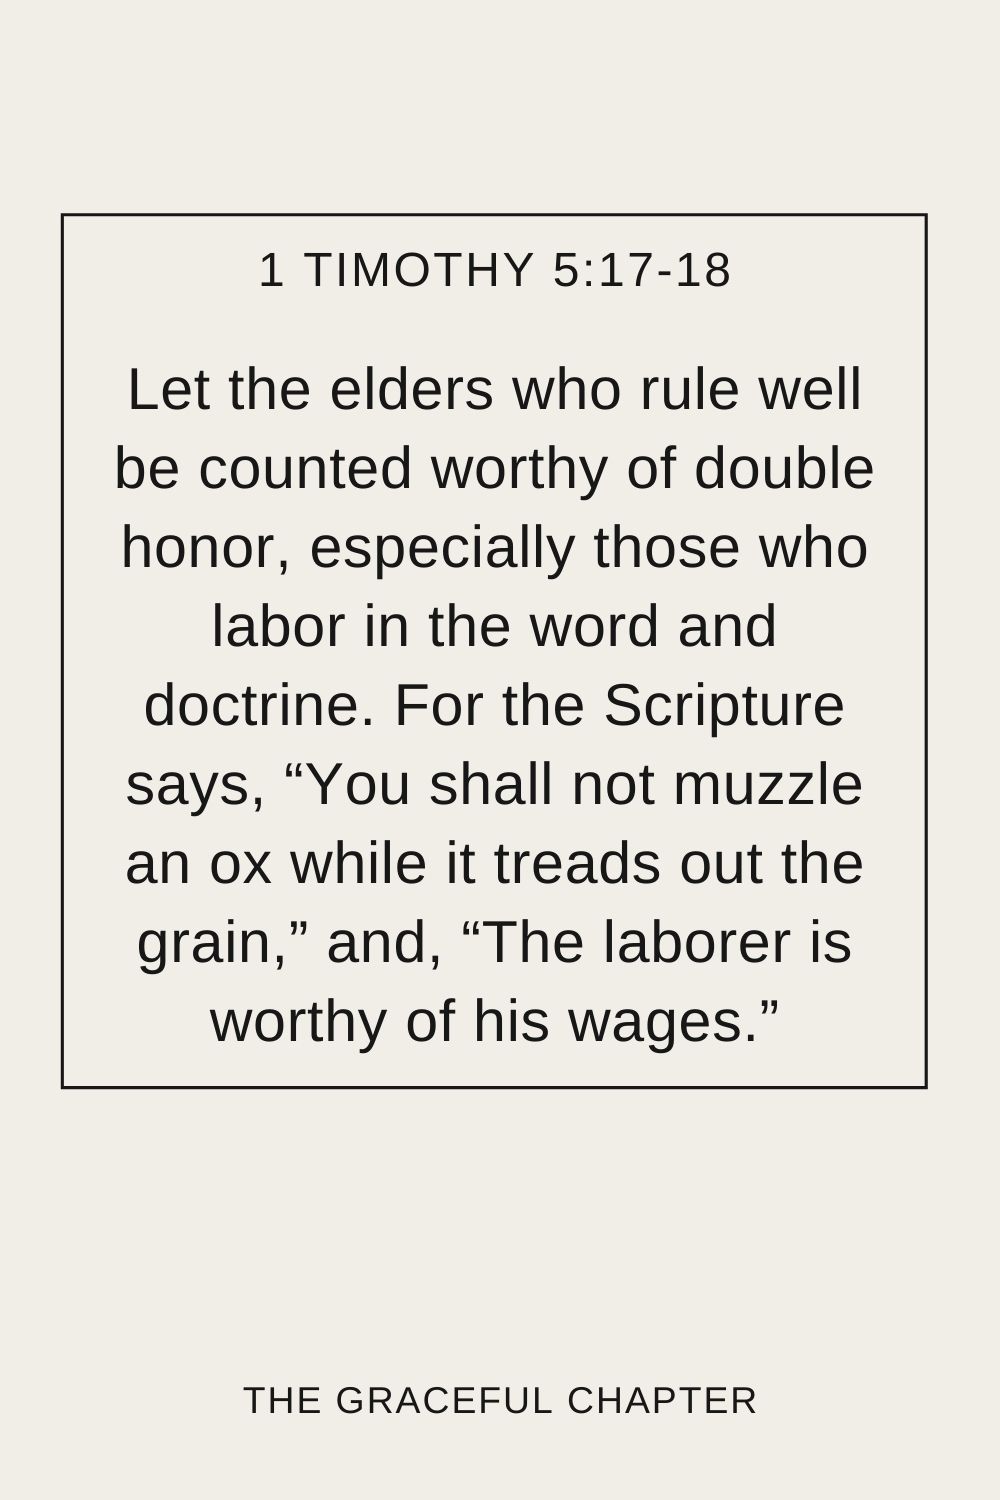 Let the elders who rule well be counted worthy of double honor, especially those who labor in the word and doctrine. For the Scripture says, “You shall not muzzle an ox while it treads out the grain,” and, “The laborer is worthy of his wages.” 1 Timothy 5:17-18